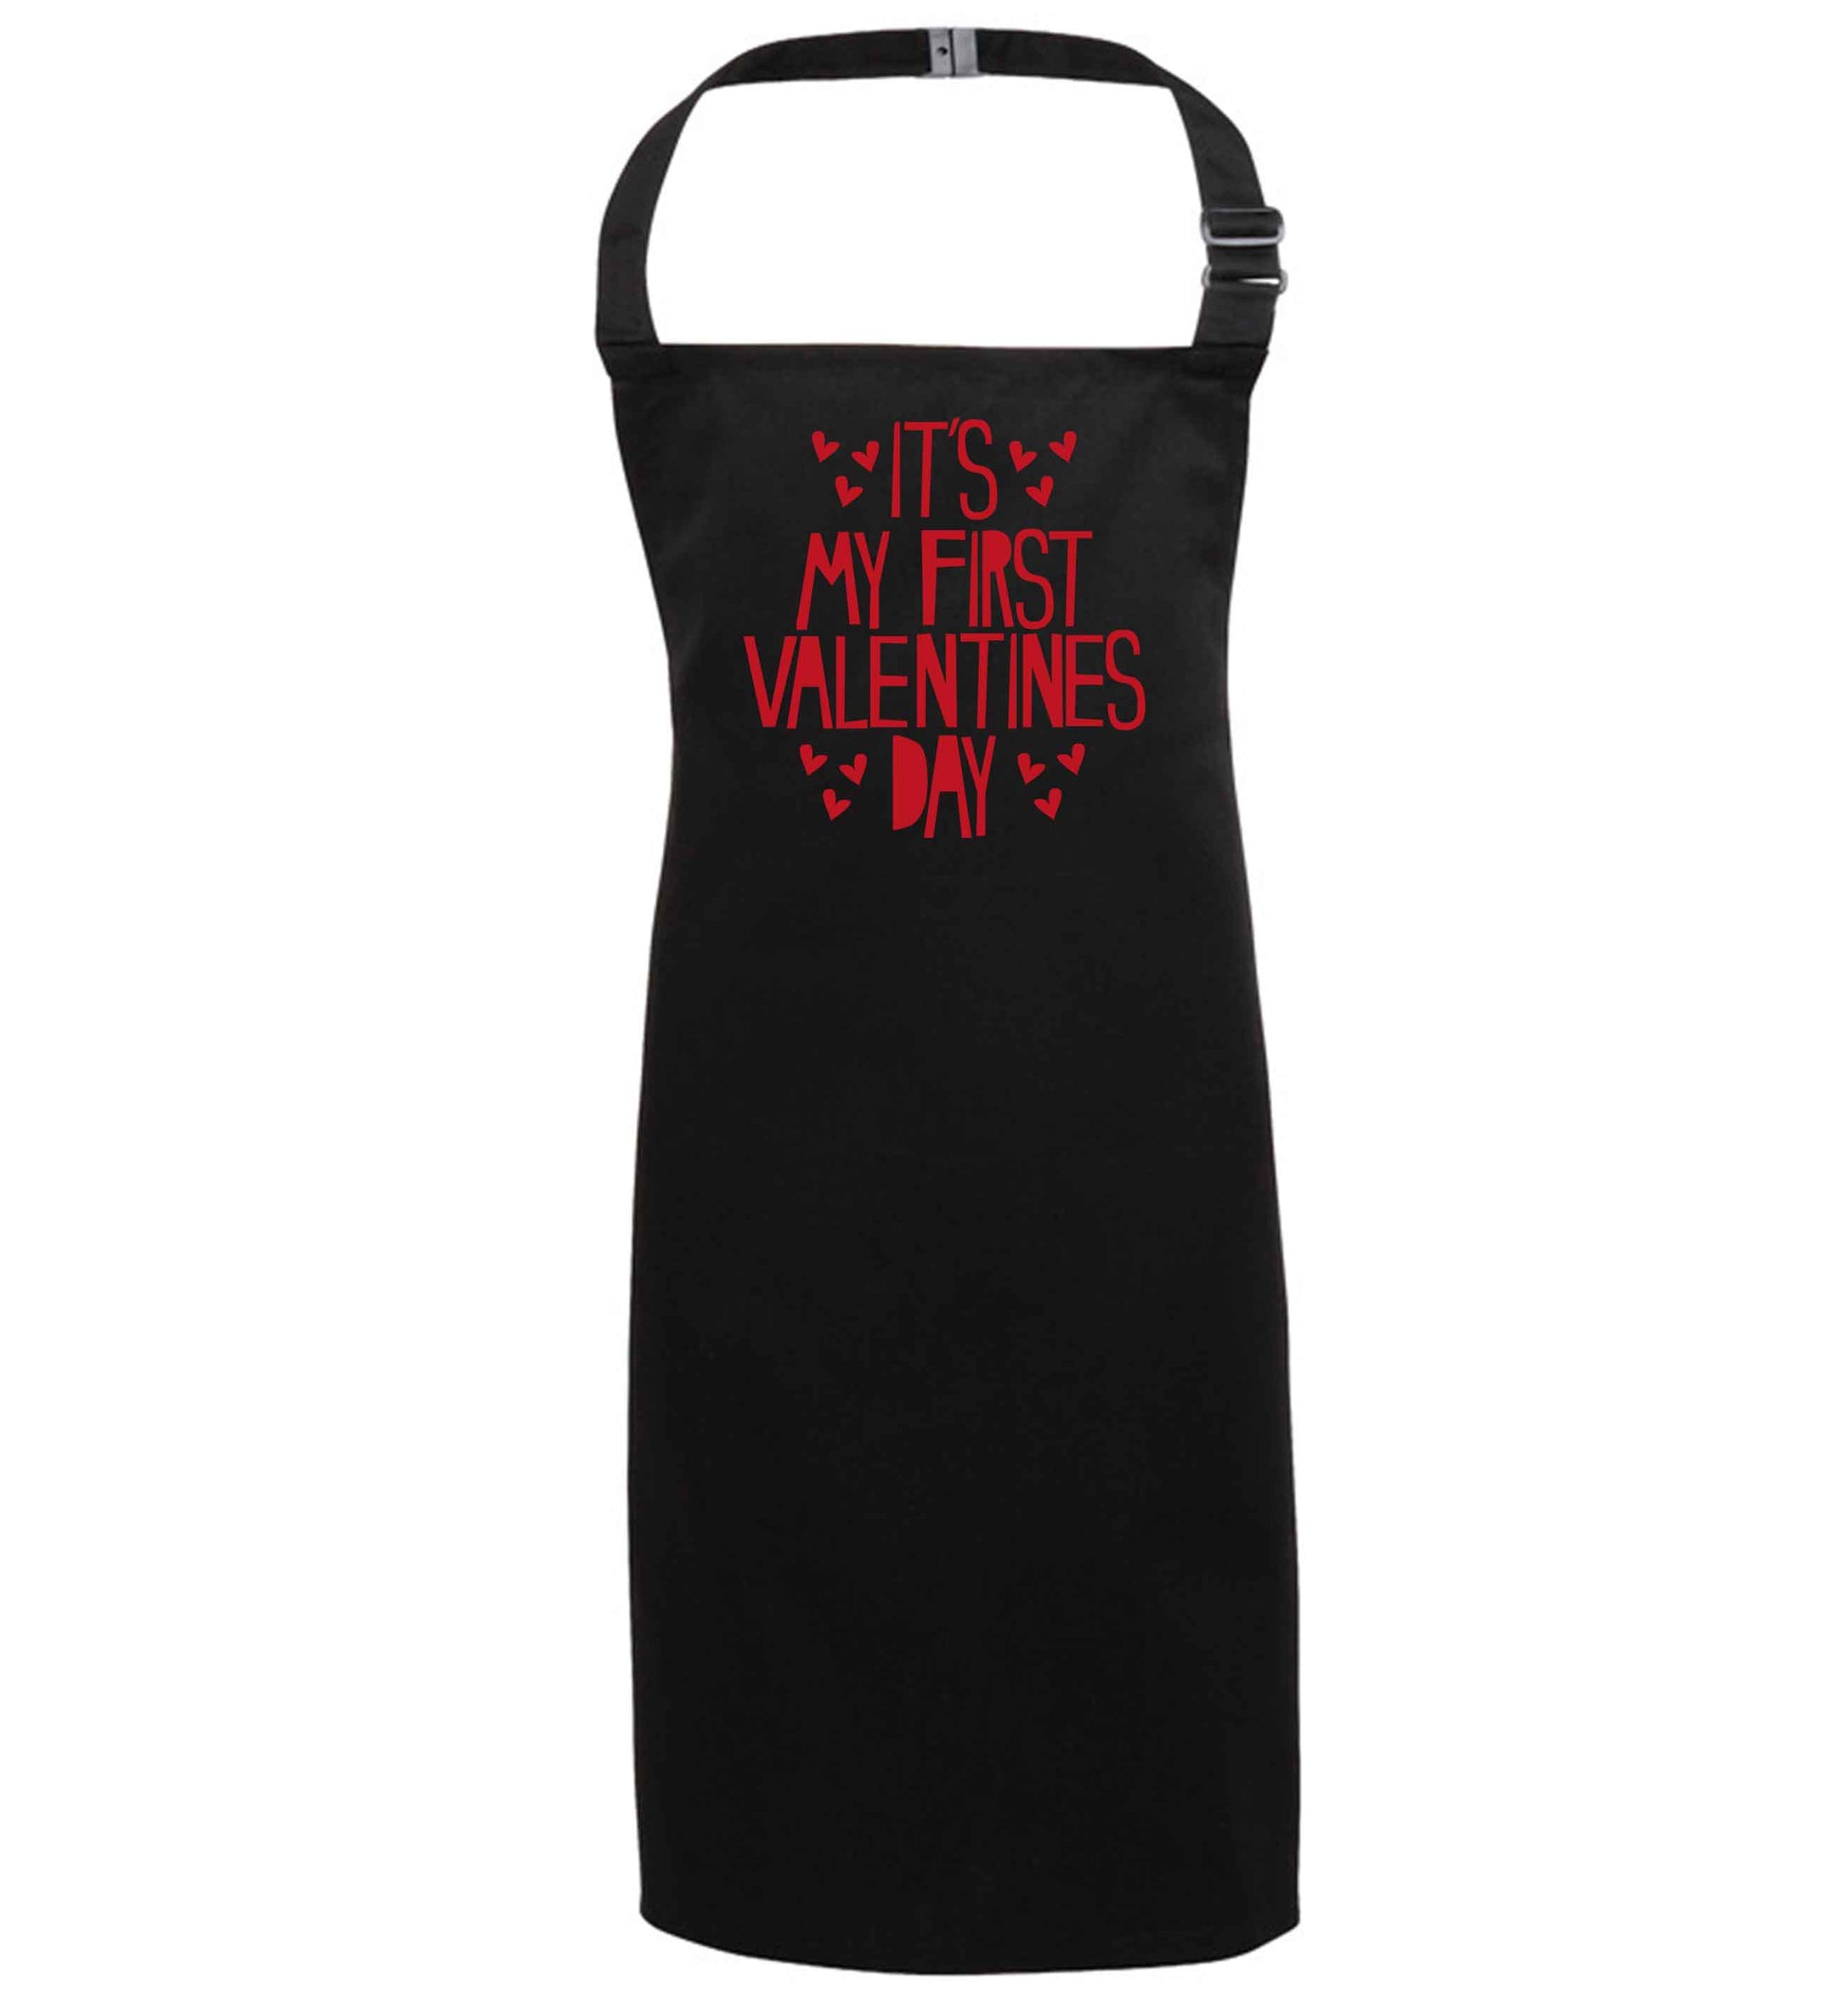 Hearts It's my First Valentine's Day black apron 7-10 years